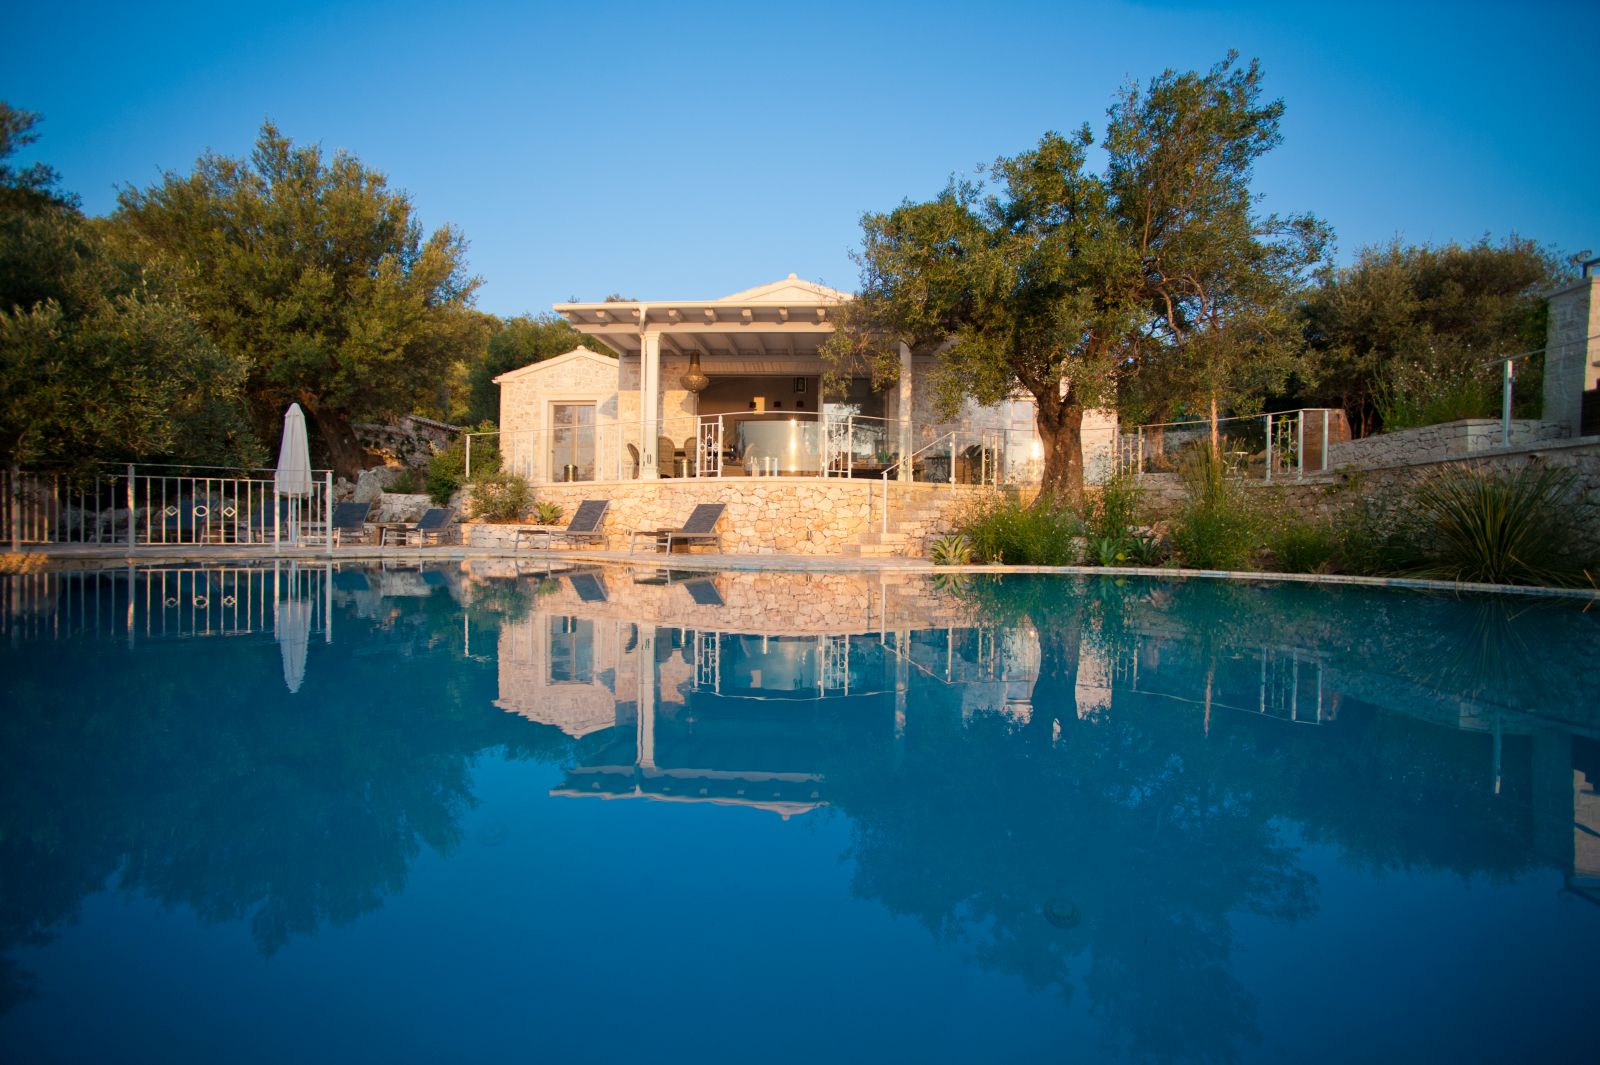 View over the blue pool up to the stone terrace at villa kalamaki in corfu, Greece